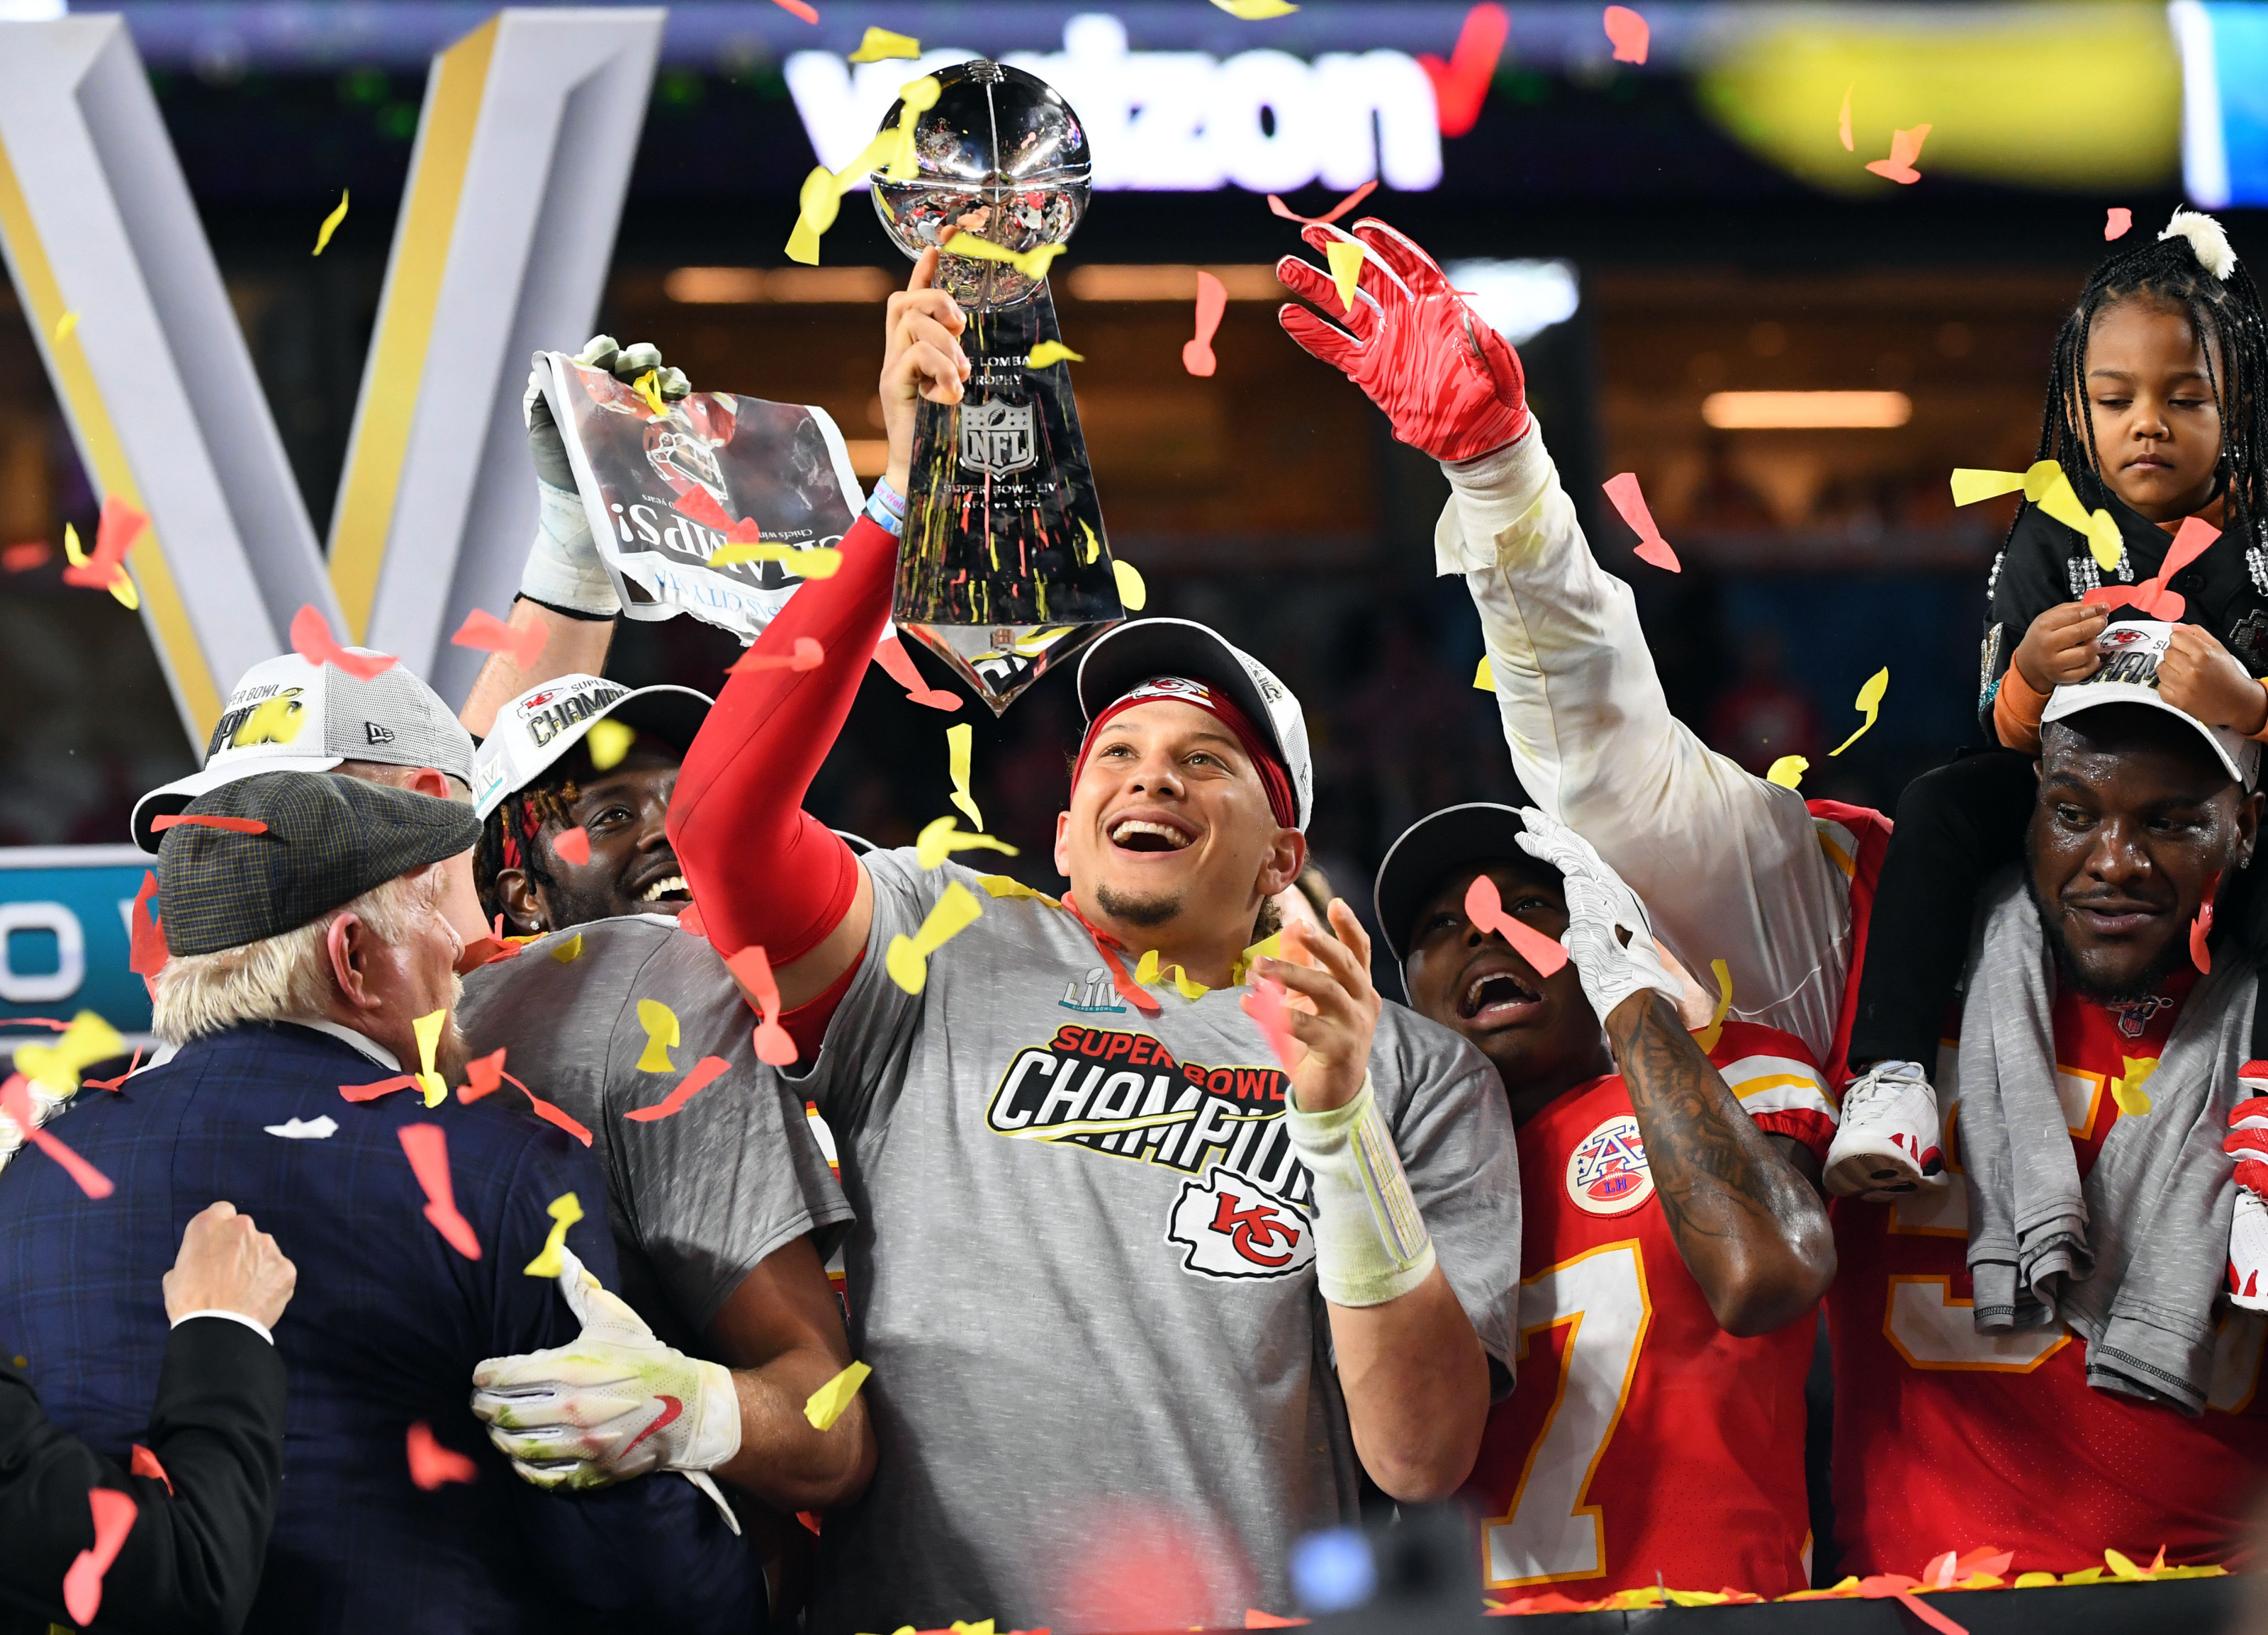 How many times has Patrick Mahomes been to the Super Bowl? [Updated]